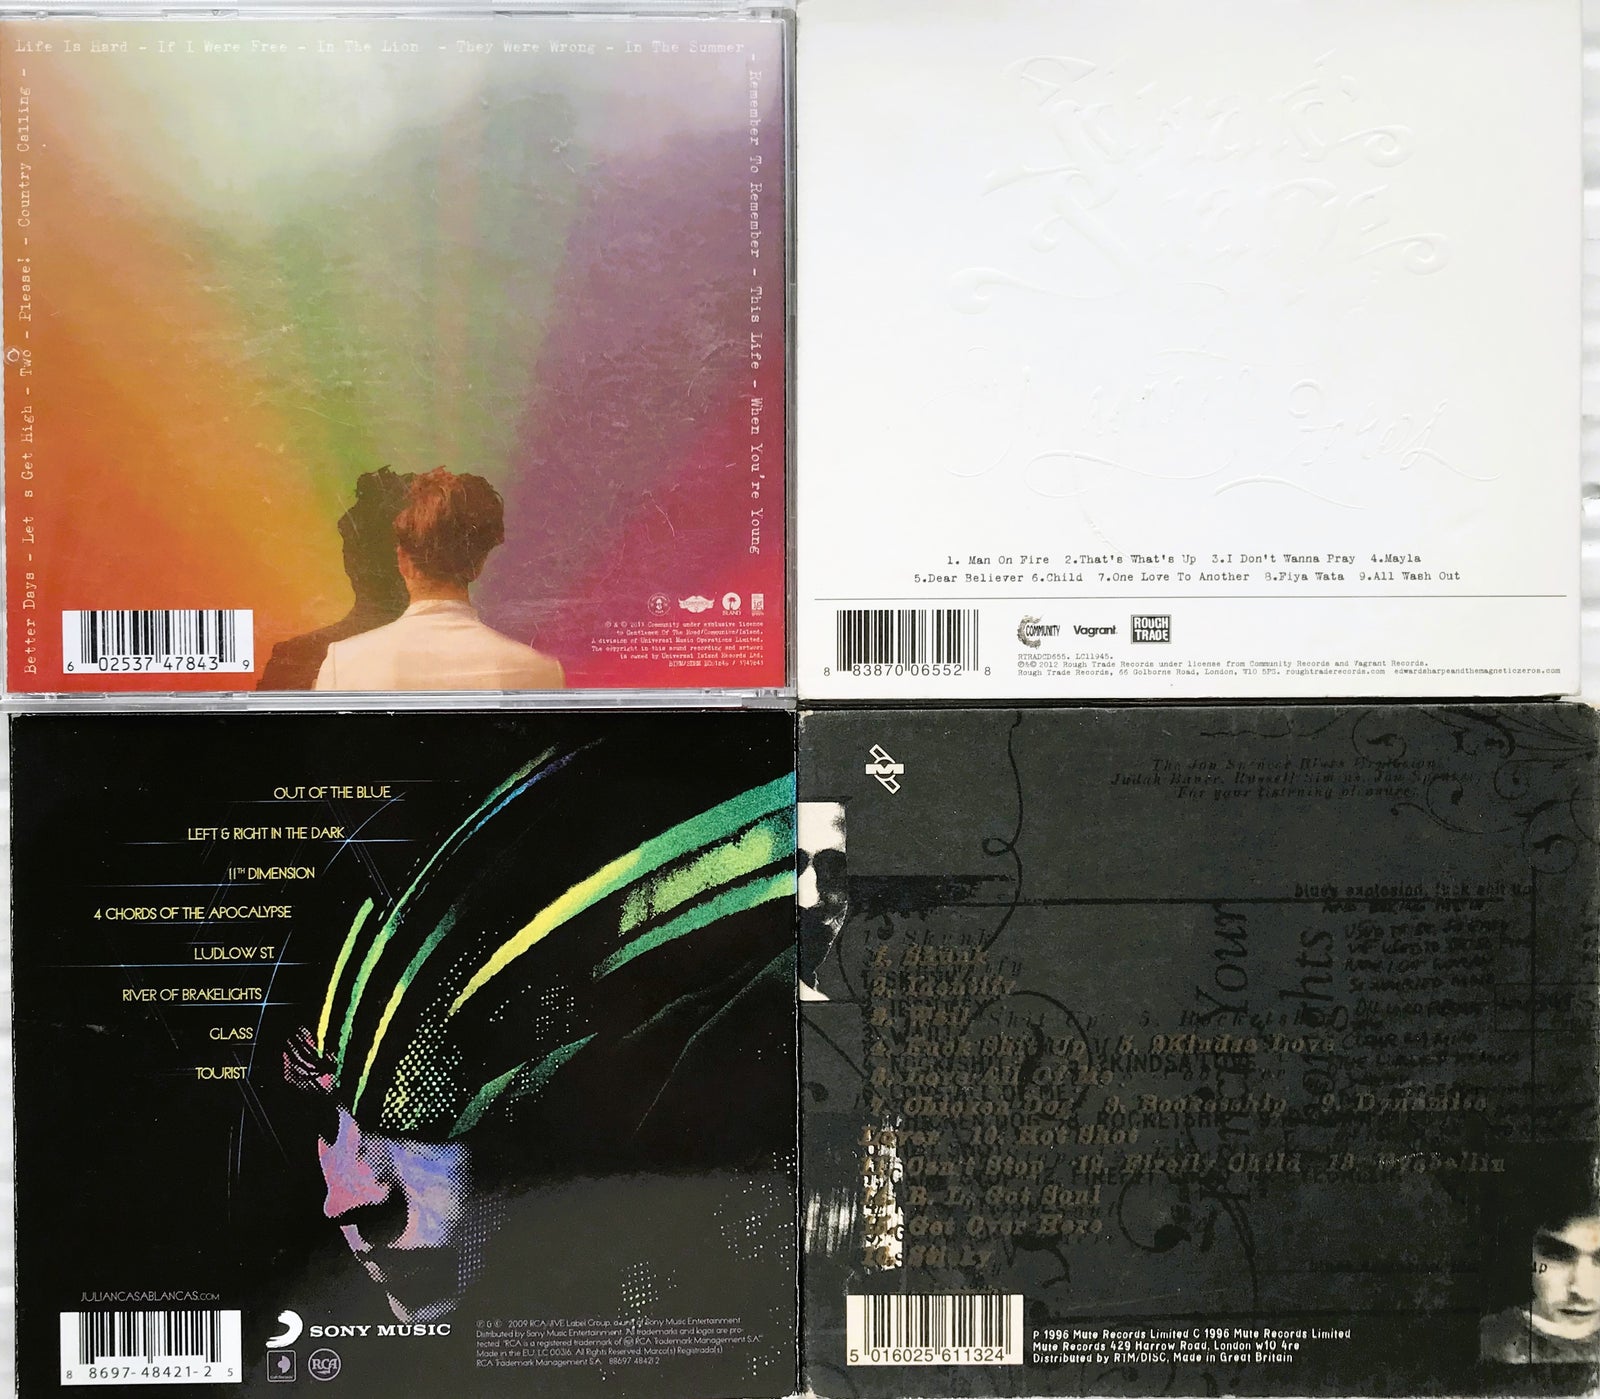 Edward Sharpe and Magnetic Zeroes m.fl.: Various, pop